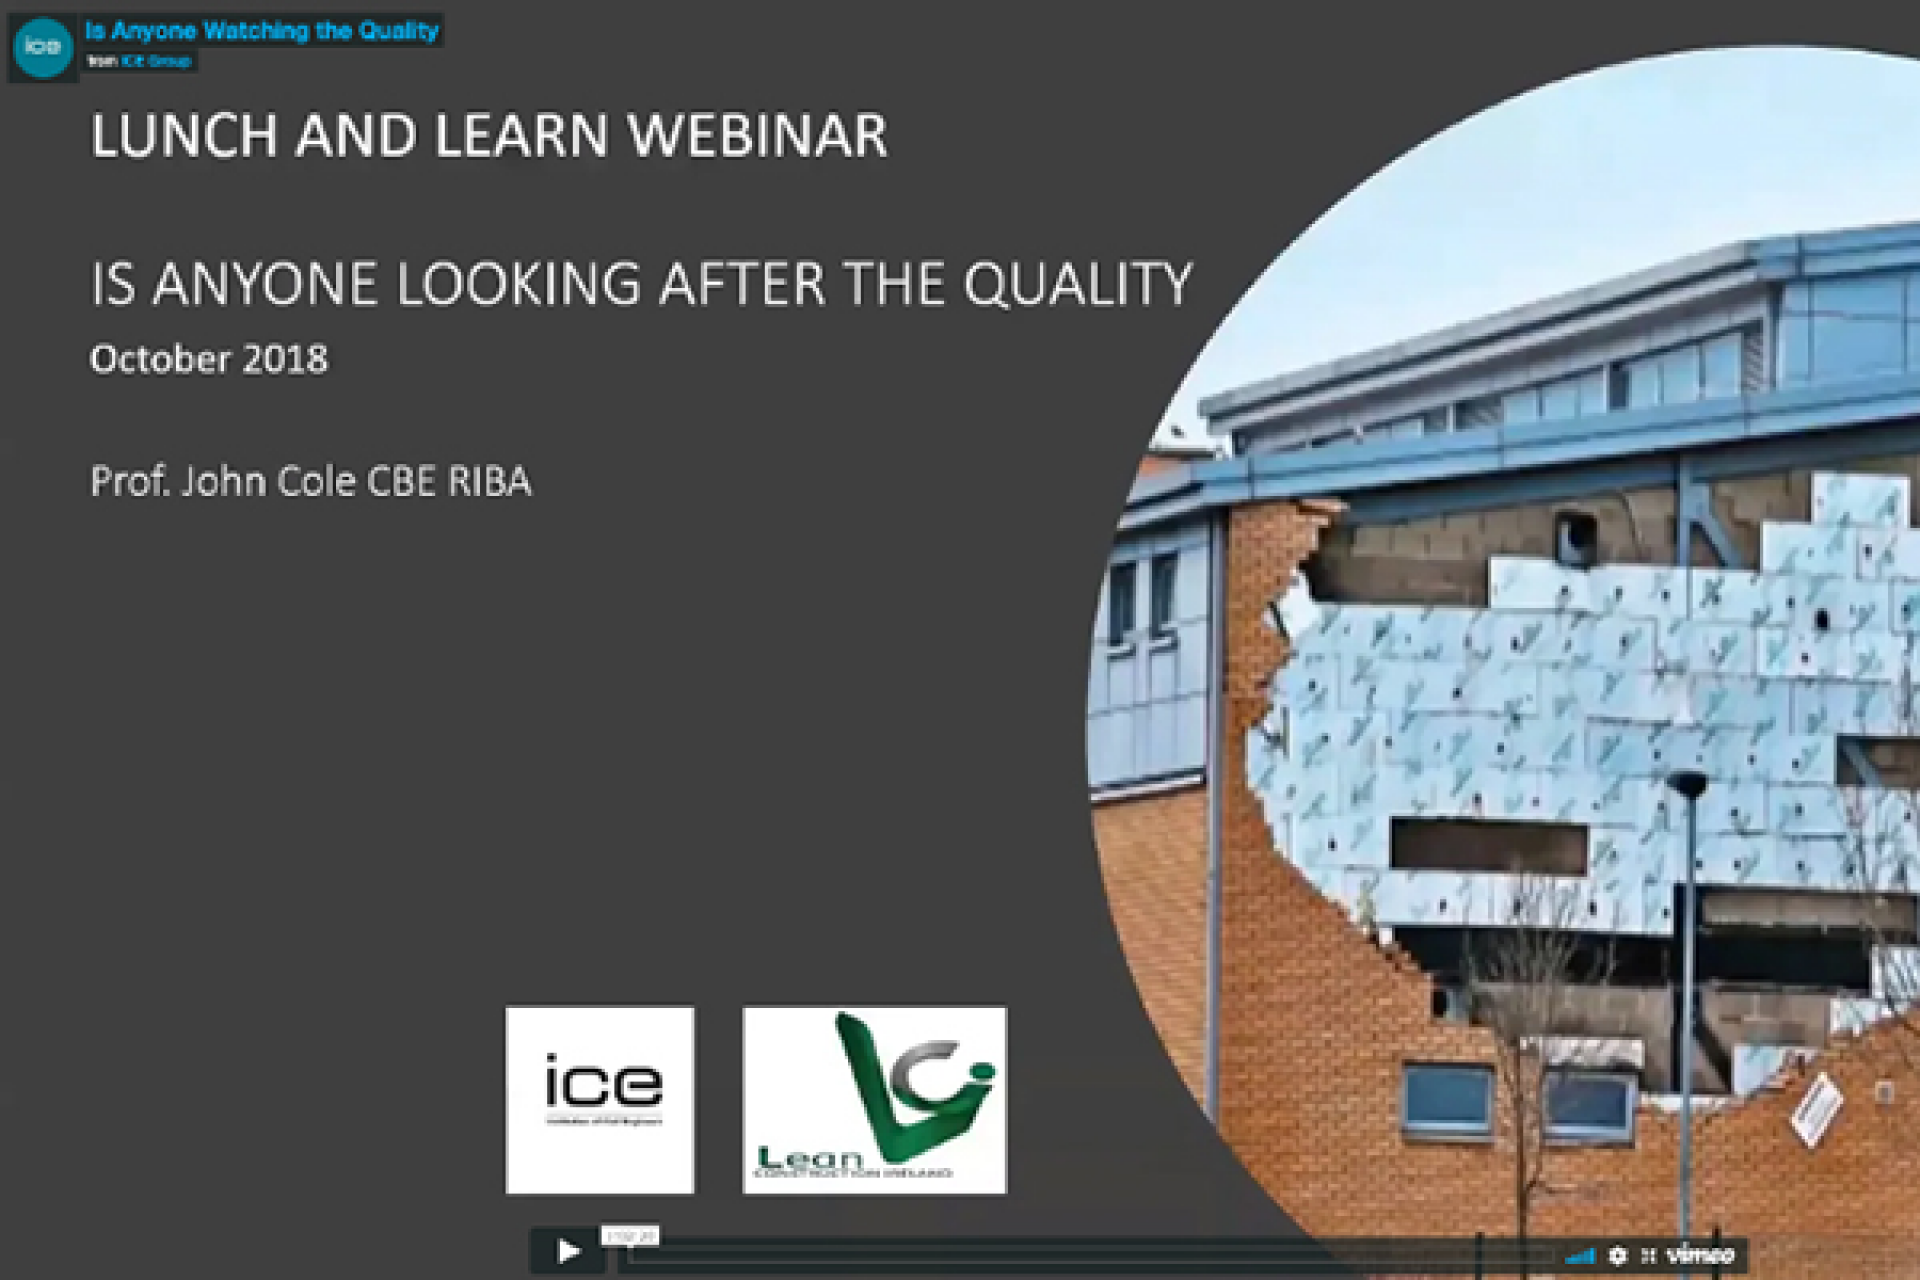 "Is Anyone Watching the Quality?" ICE NI & Lean Construction webinar